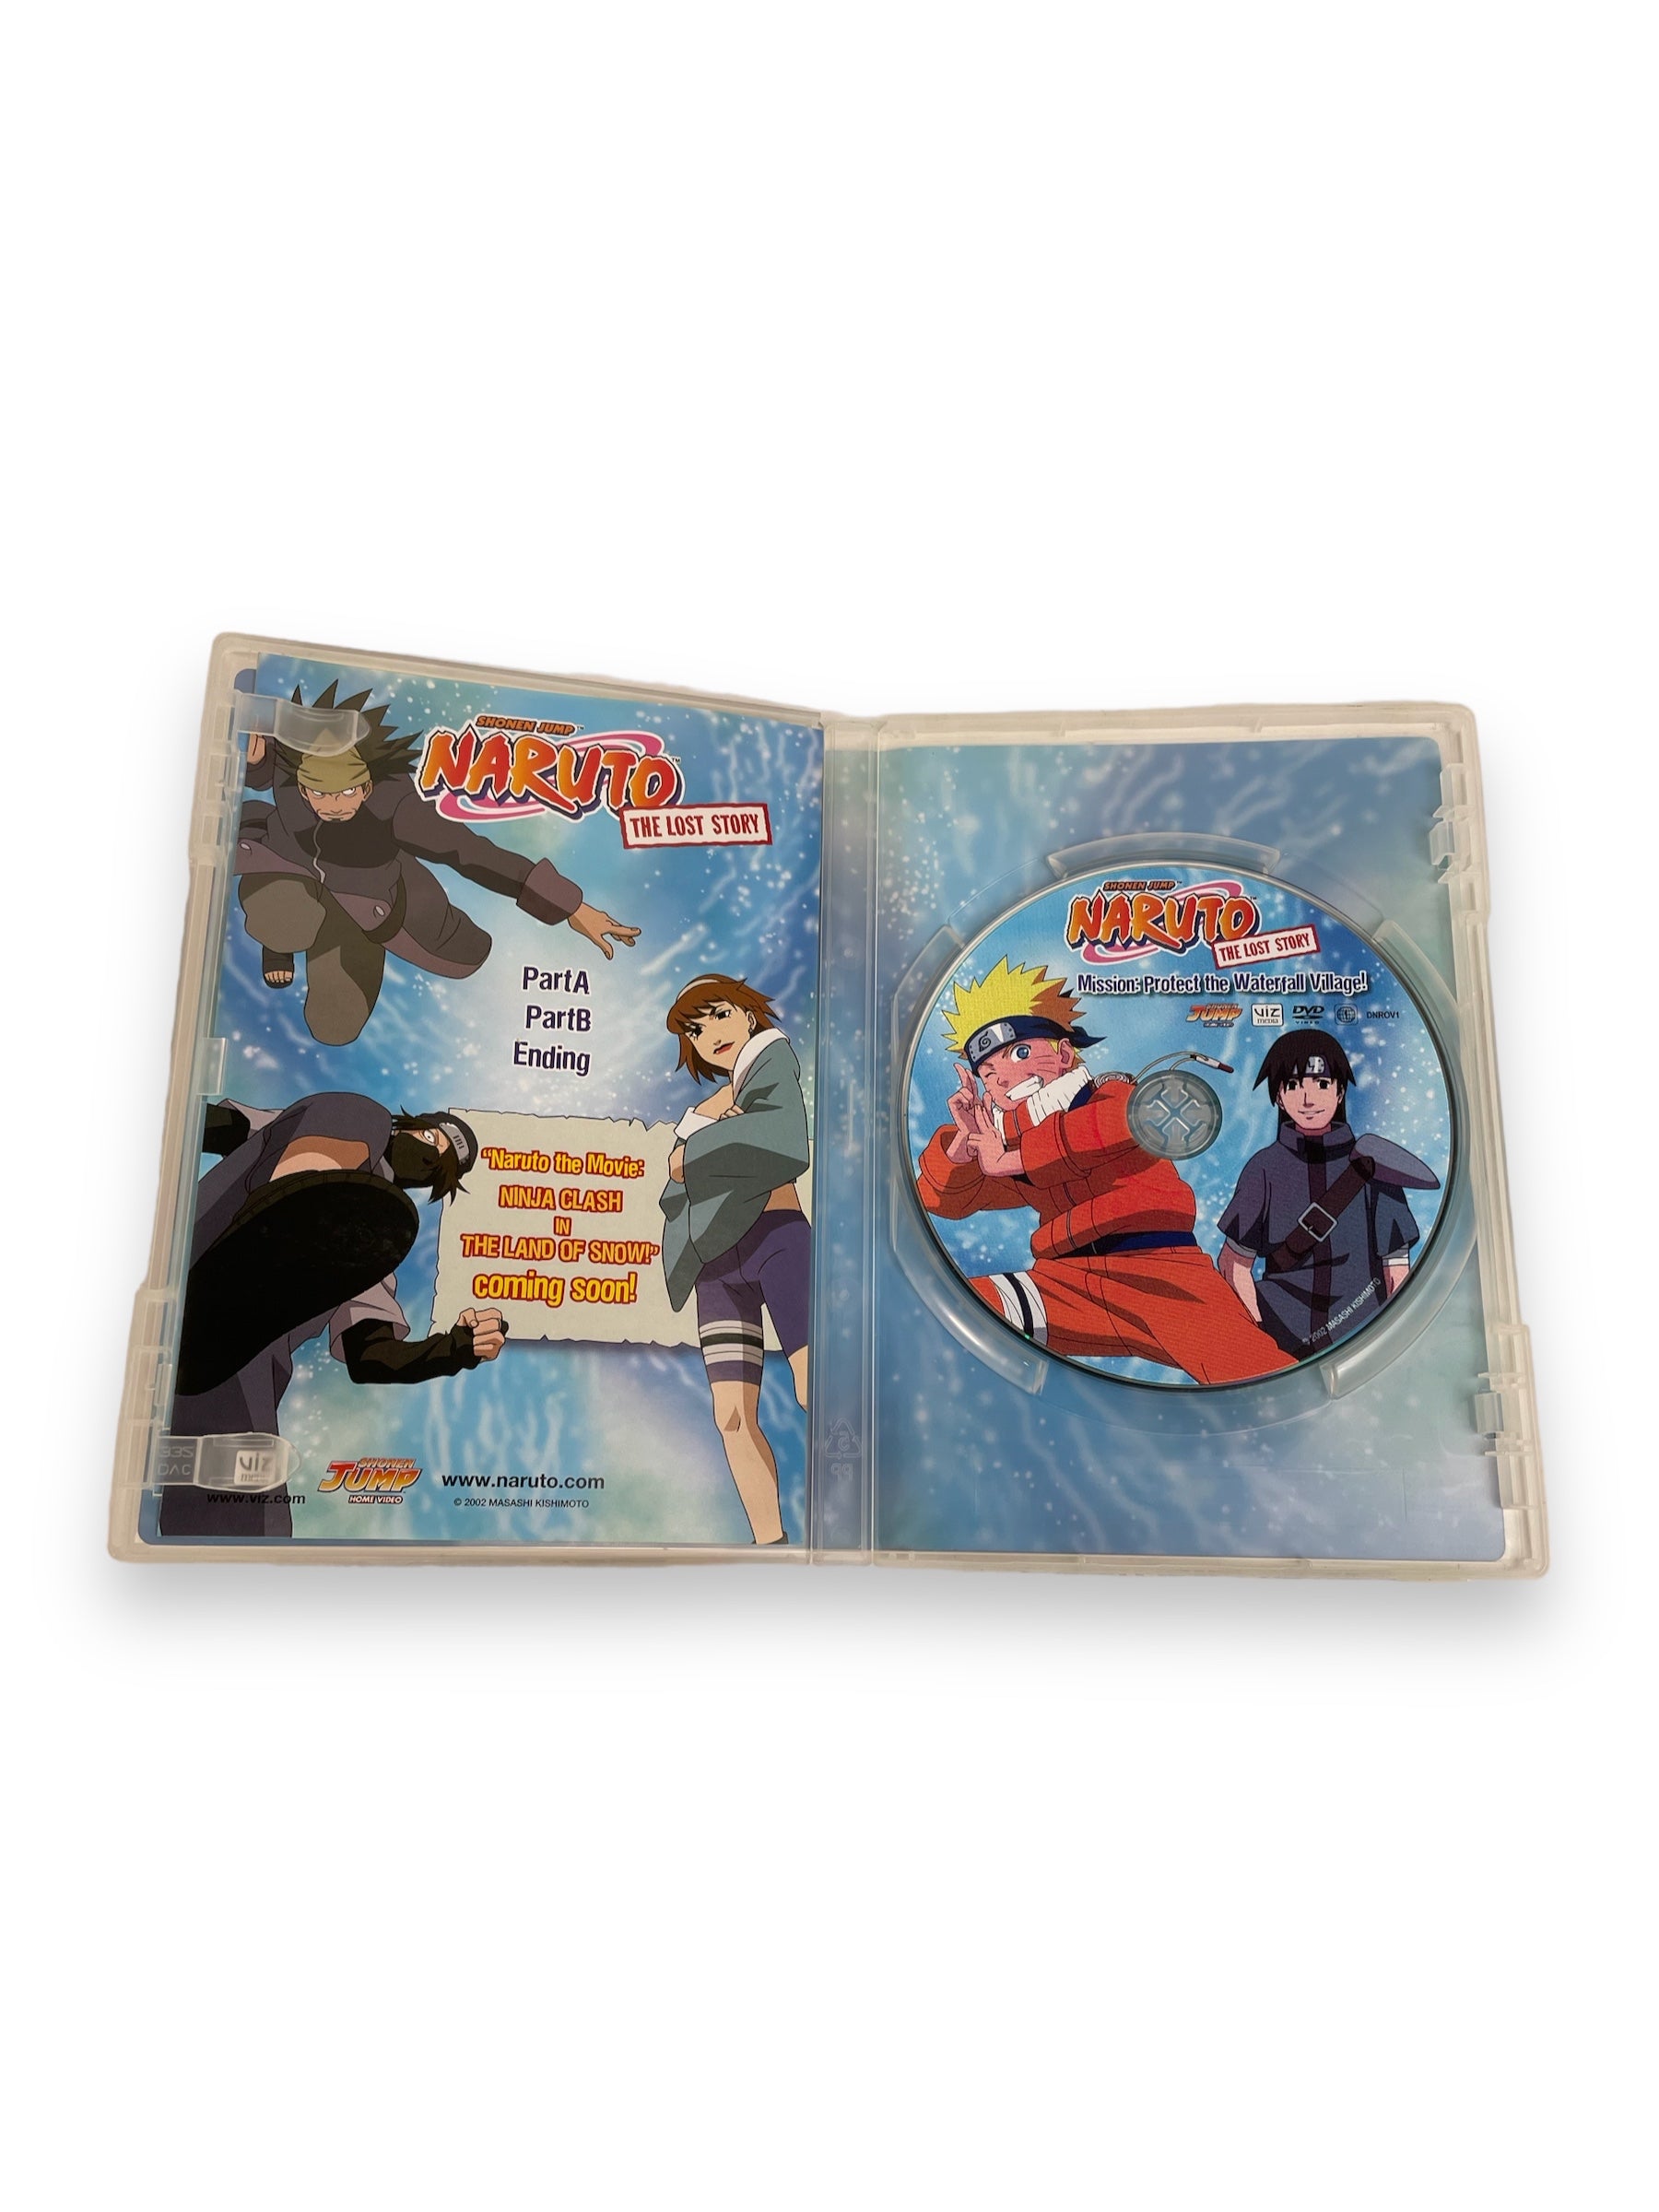 Naruto: The Lost Story: Mission: Protect The Waterfall Village DVD